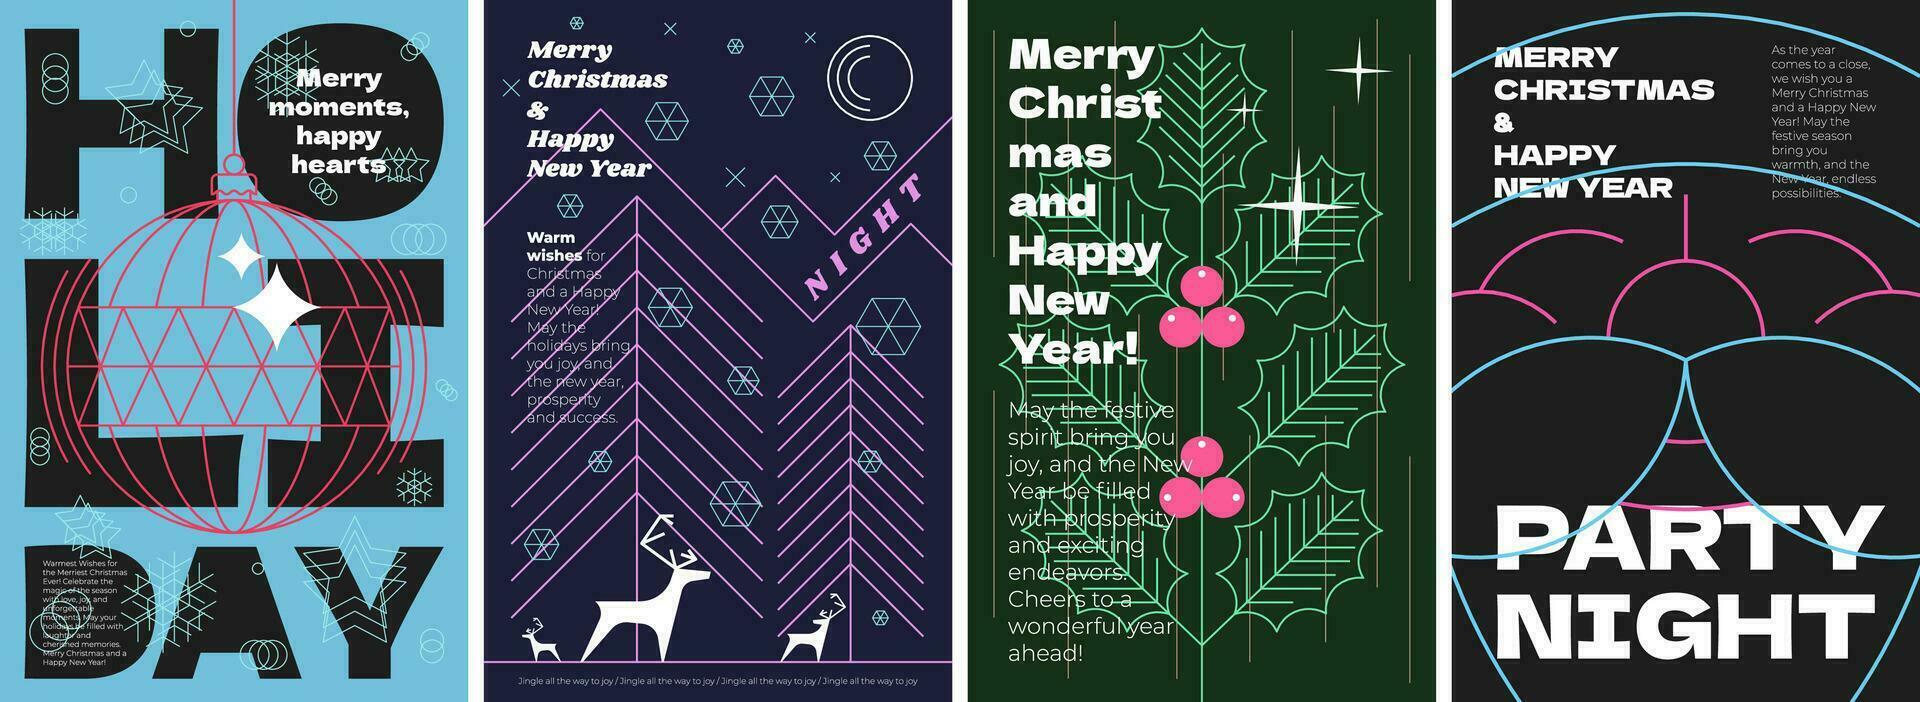 Merry Christmas and Happy New Year holiday party night minimal style abstract linear graphic poster set. Celebration decoration print with mistletoe branch and reindeer. Modern trendy art cover design vector